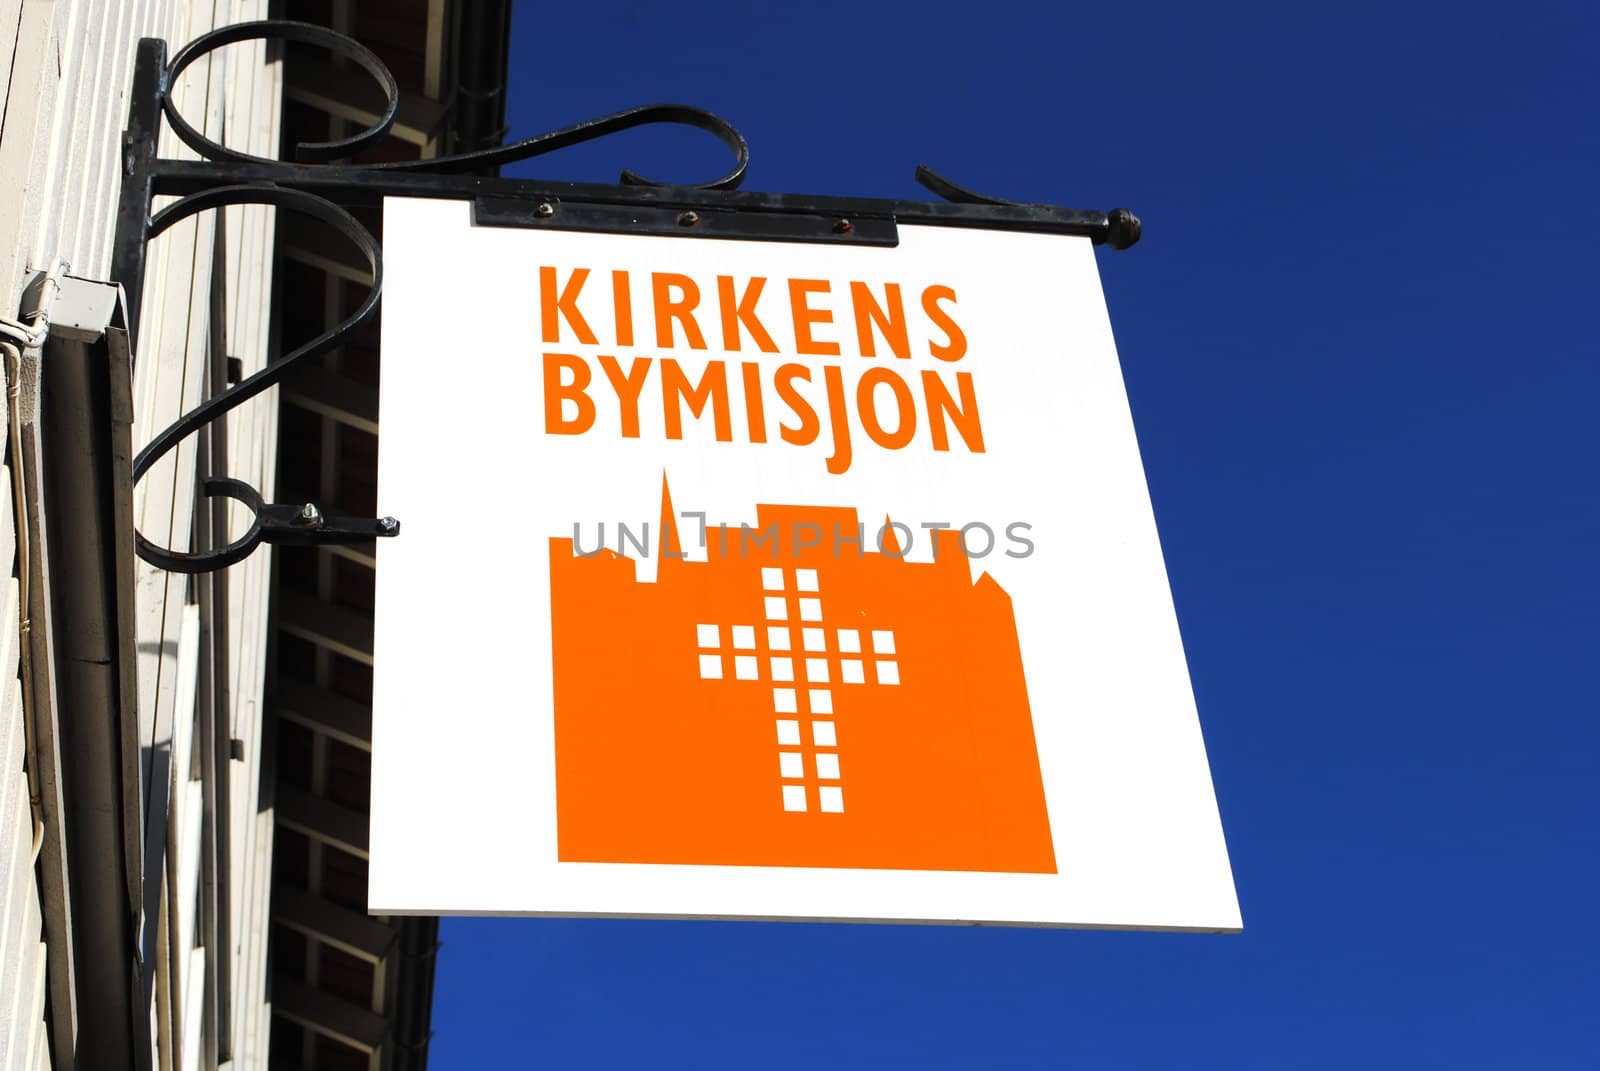 Sign of the Church City Mission (Norwegian: Kirkens Bymisjon), a diaconal foundation in Norway doing social work.